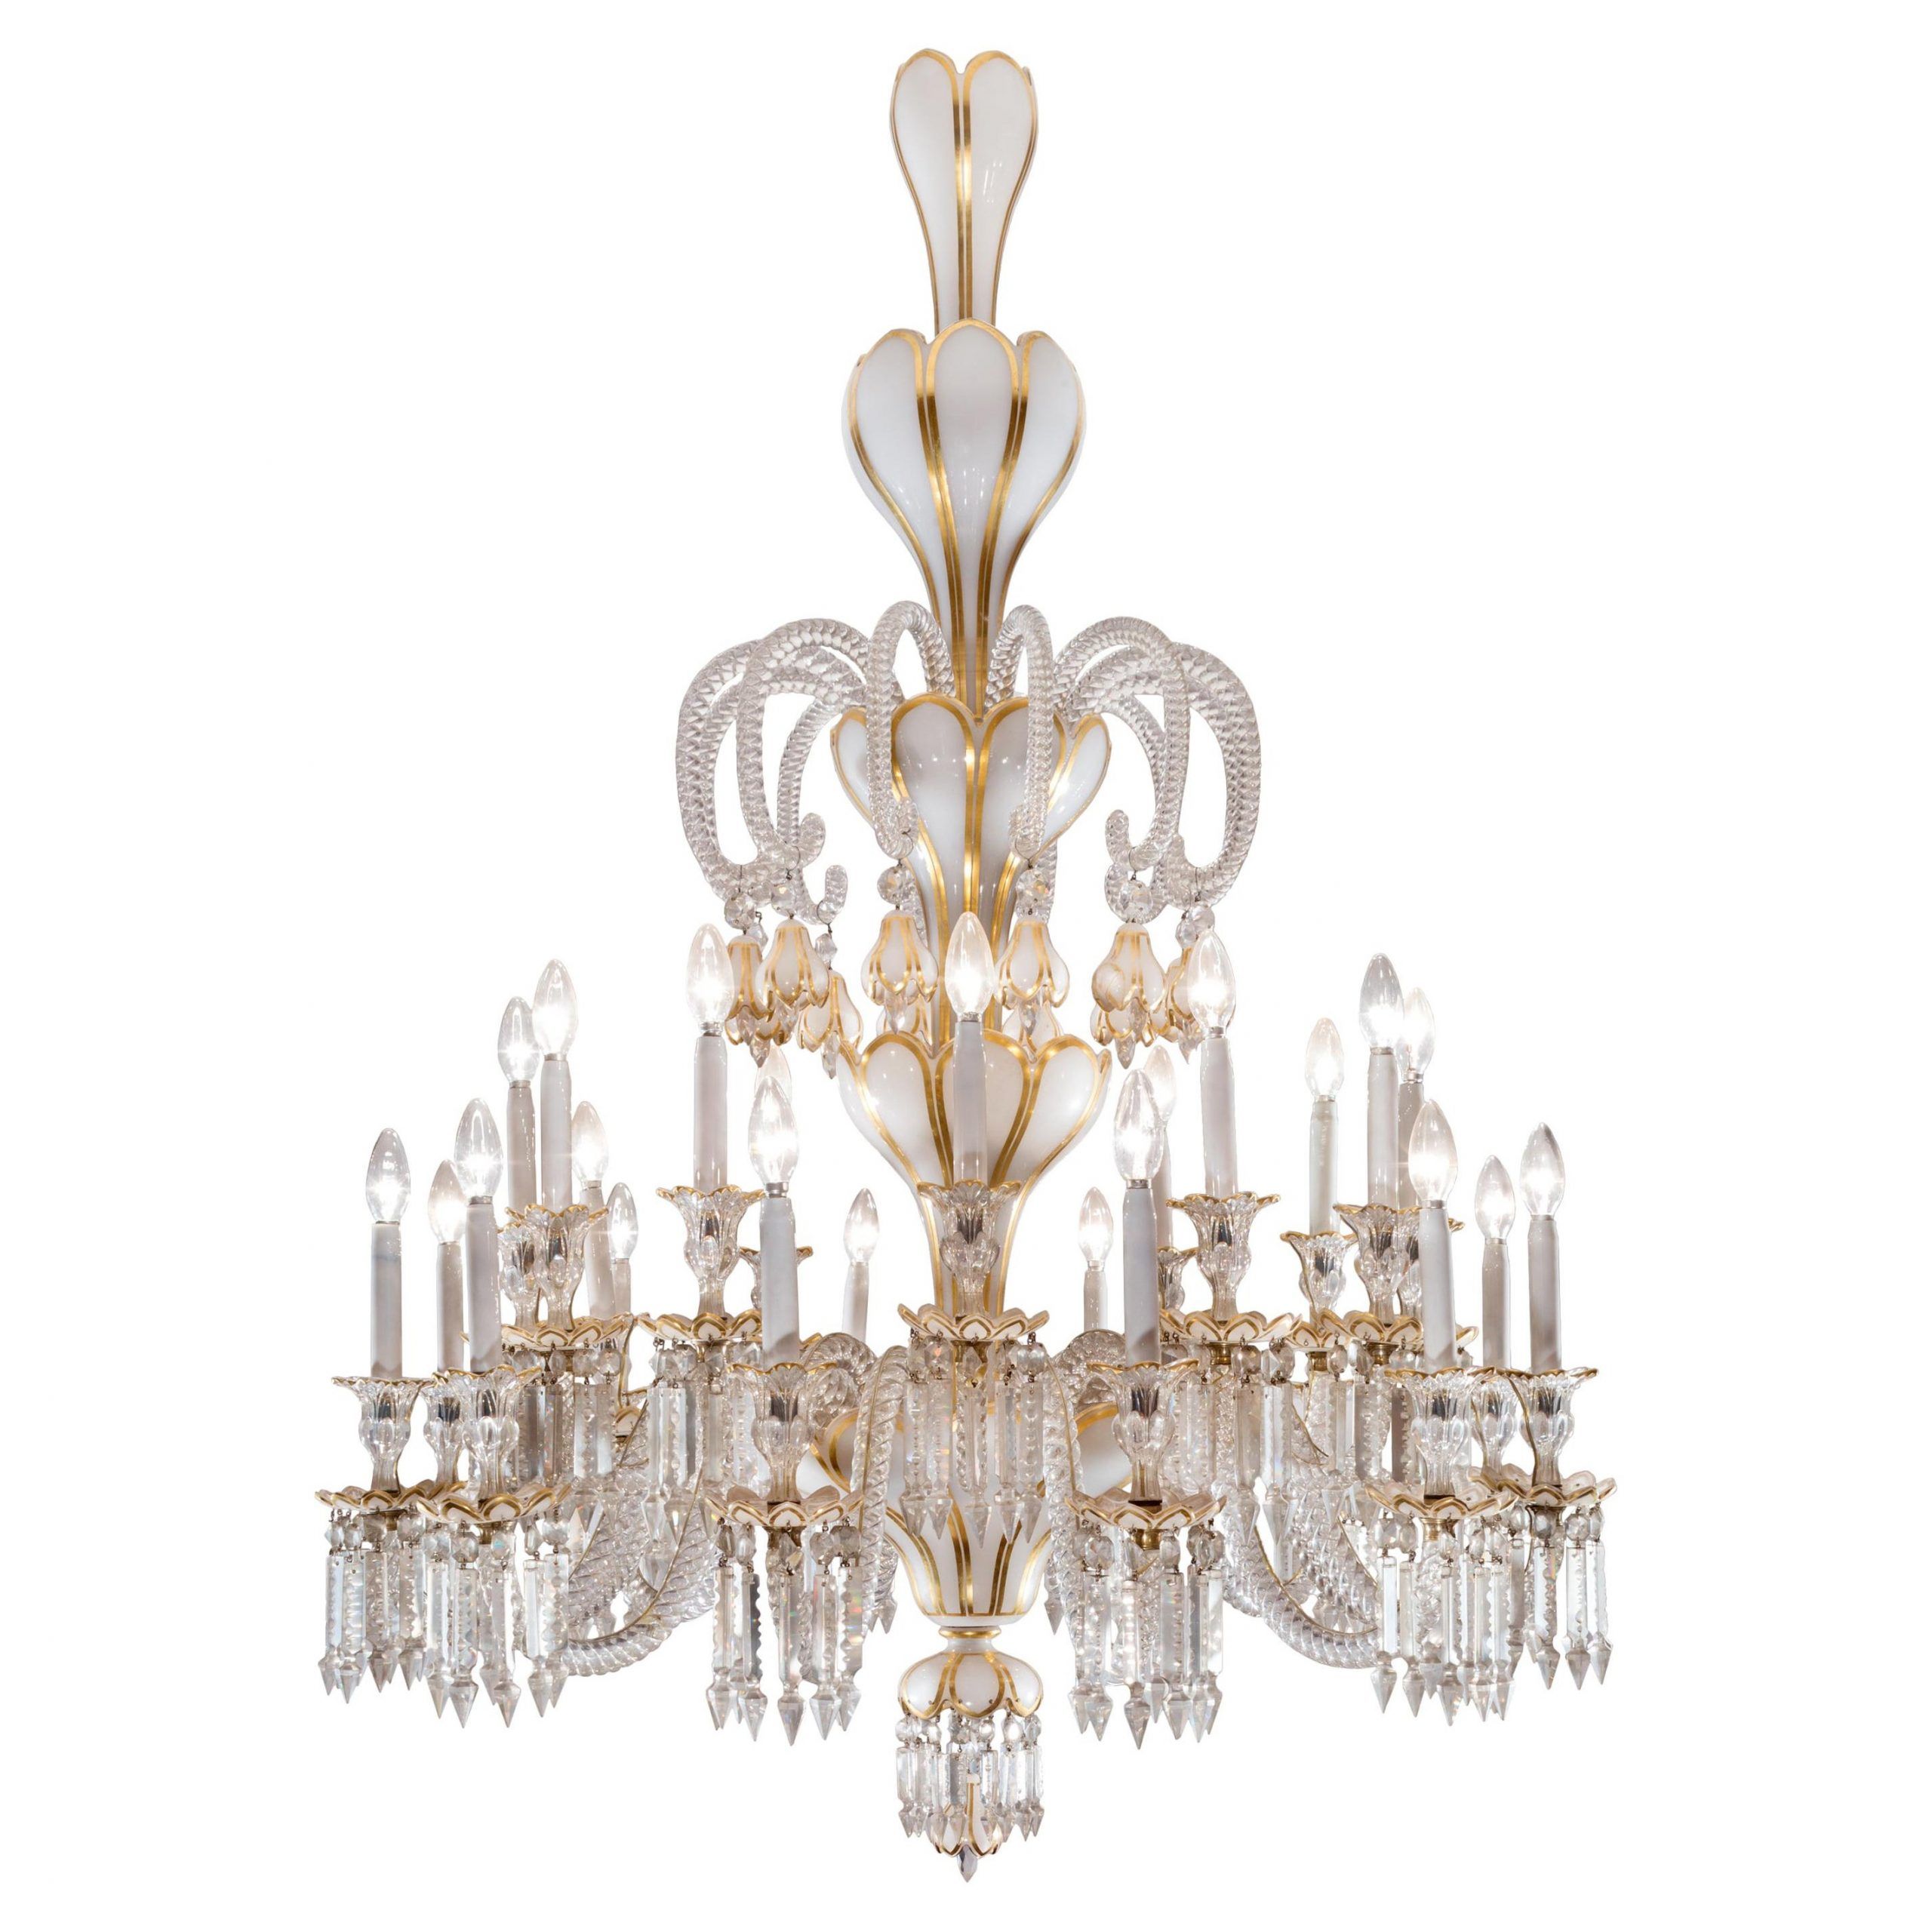 Rosaline Crystals Lantern Chandeliers Throughout Most Current 19th C (View 8 of 10)